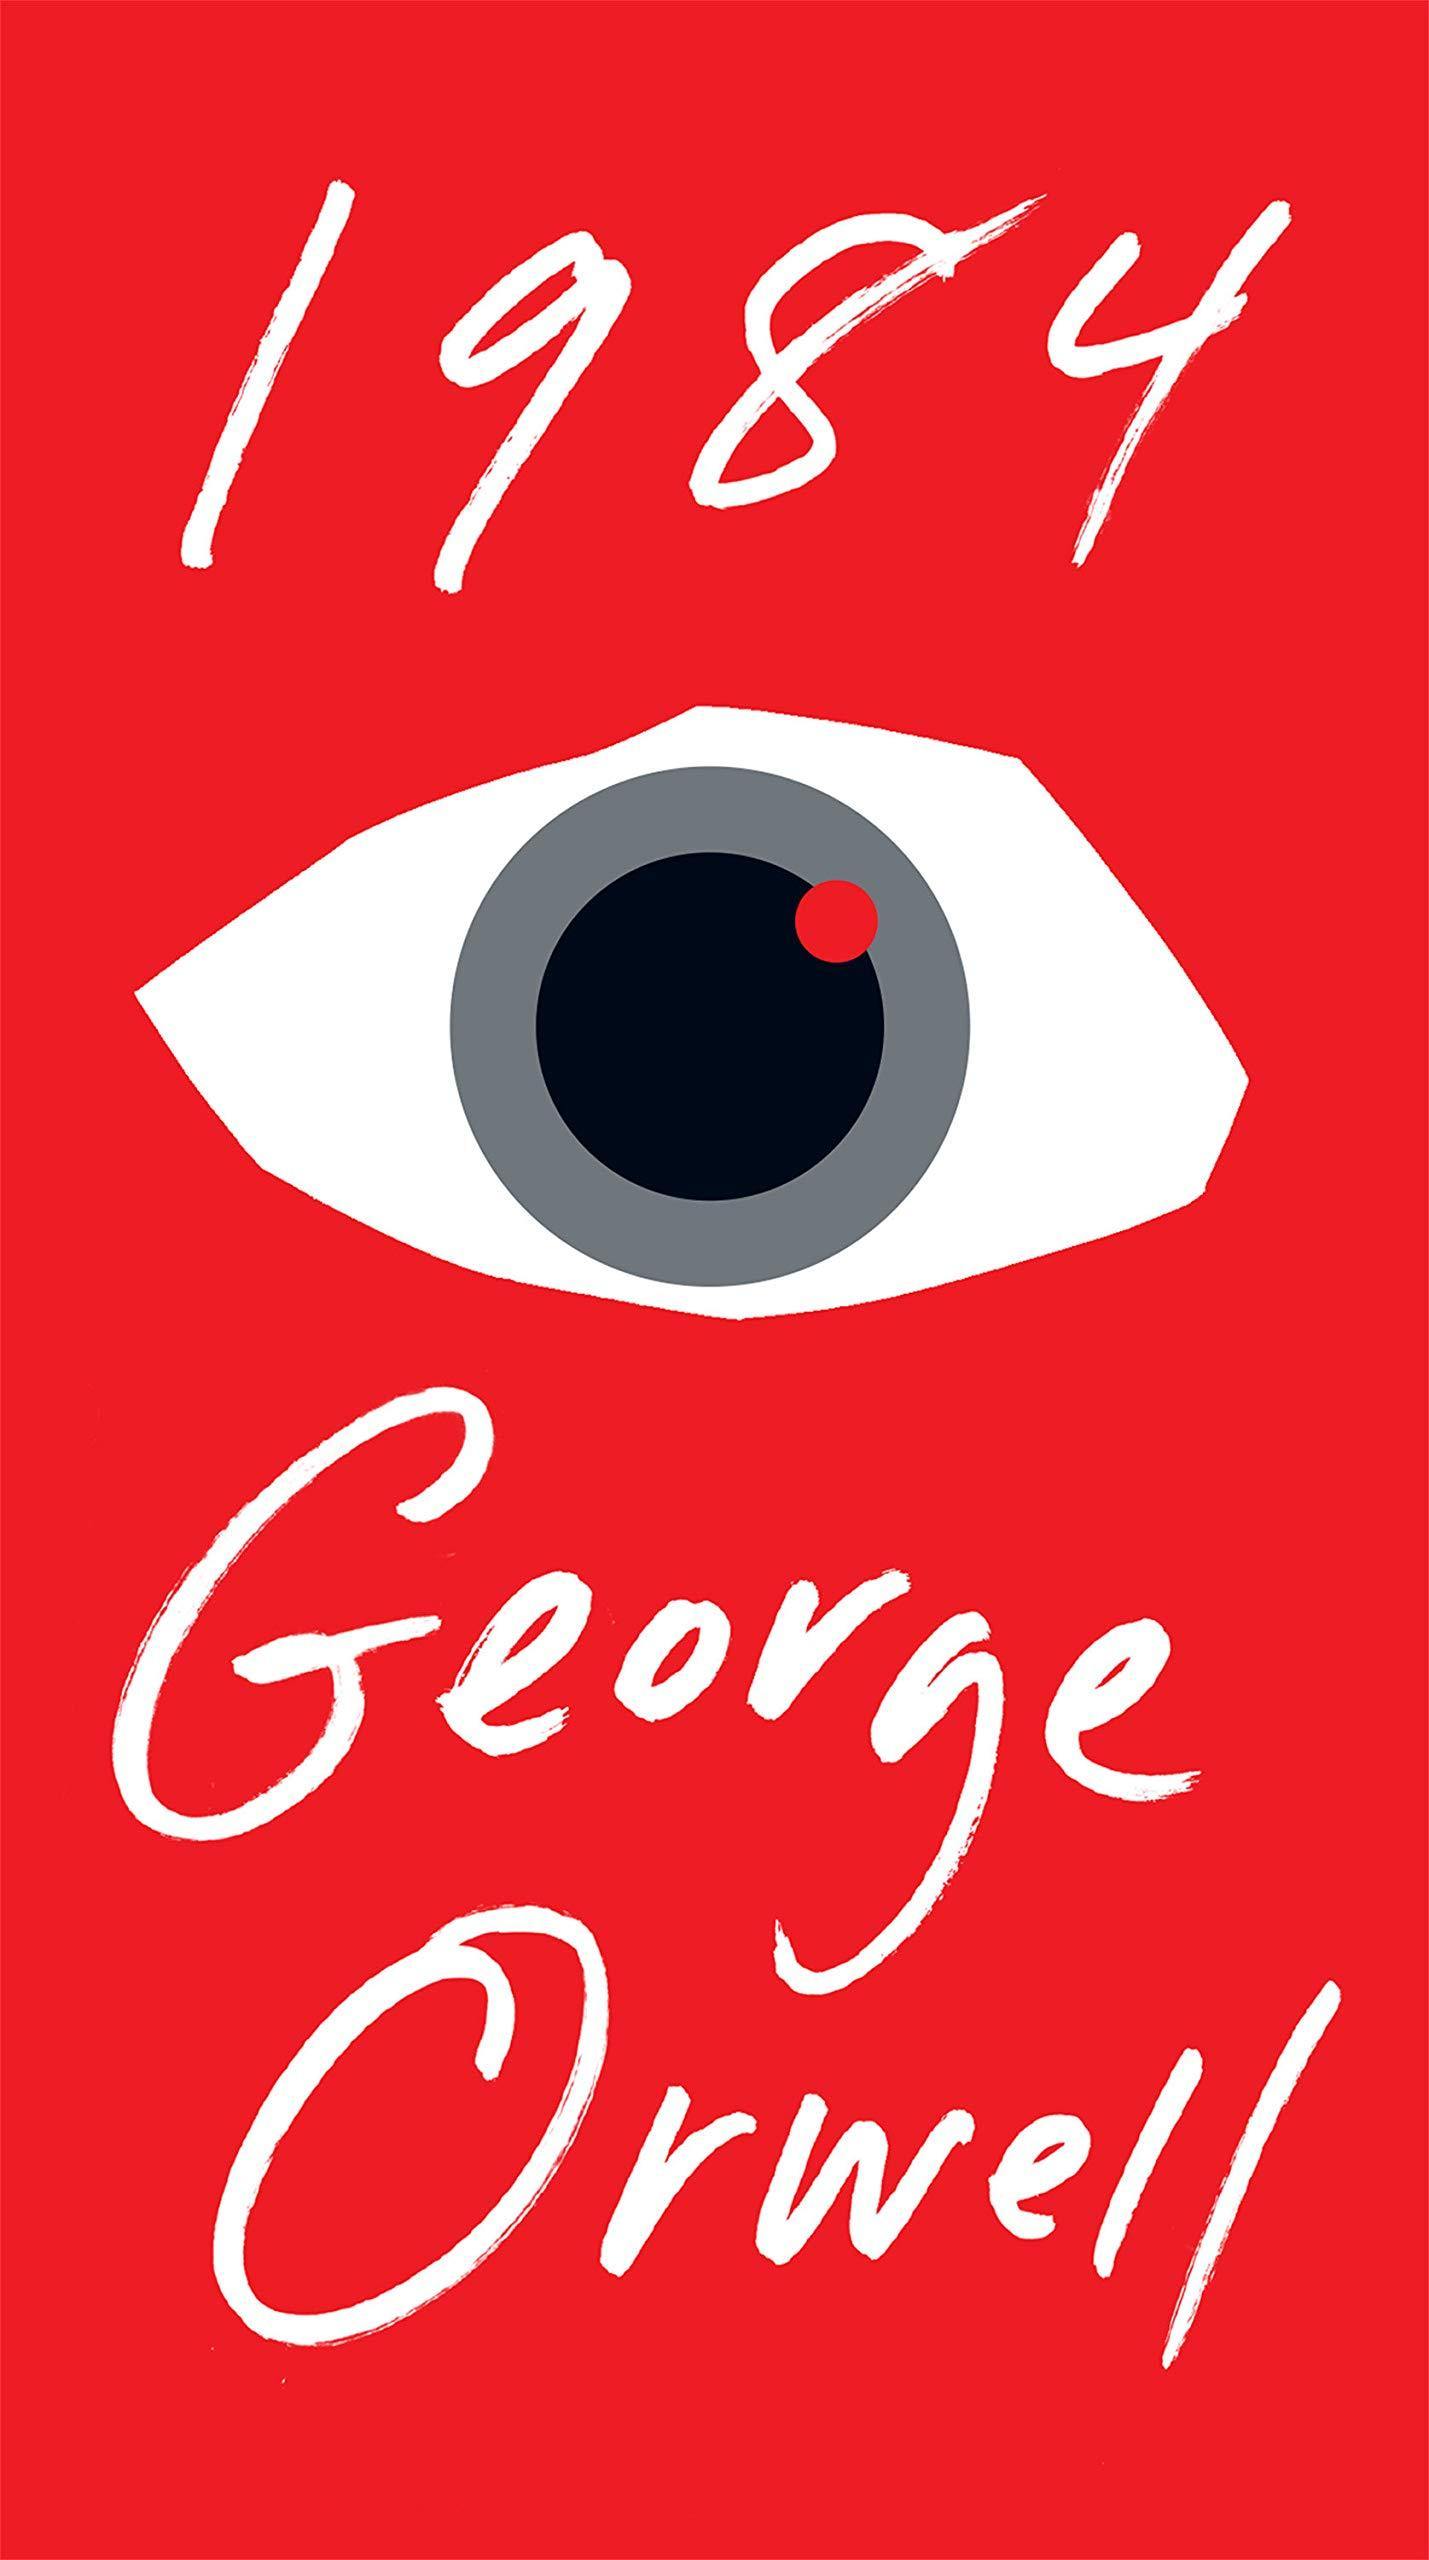 1984 by George Orwell - Book A Book